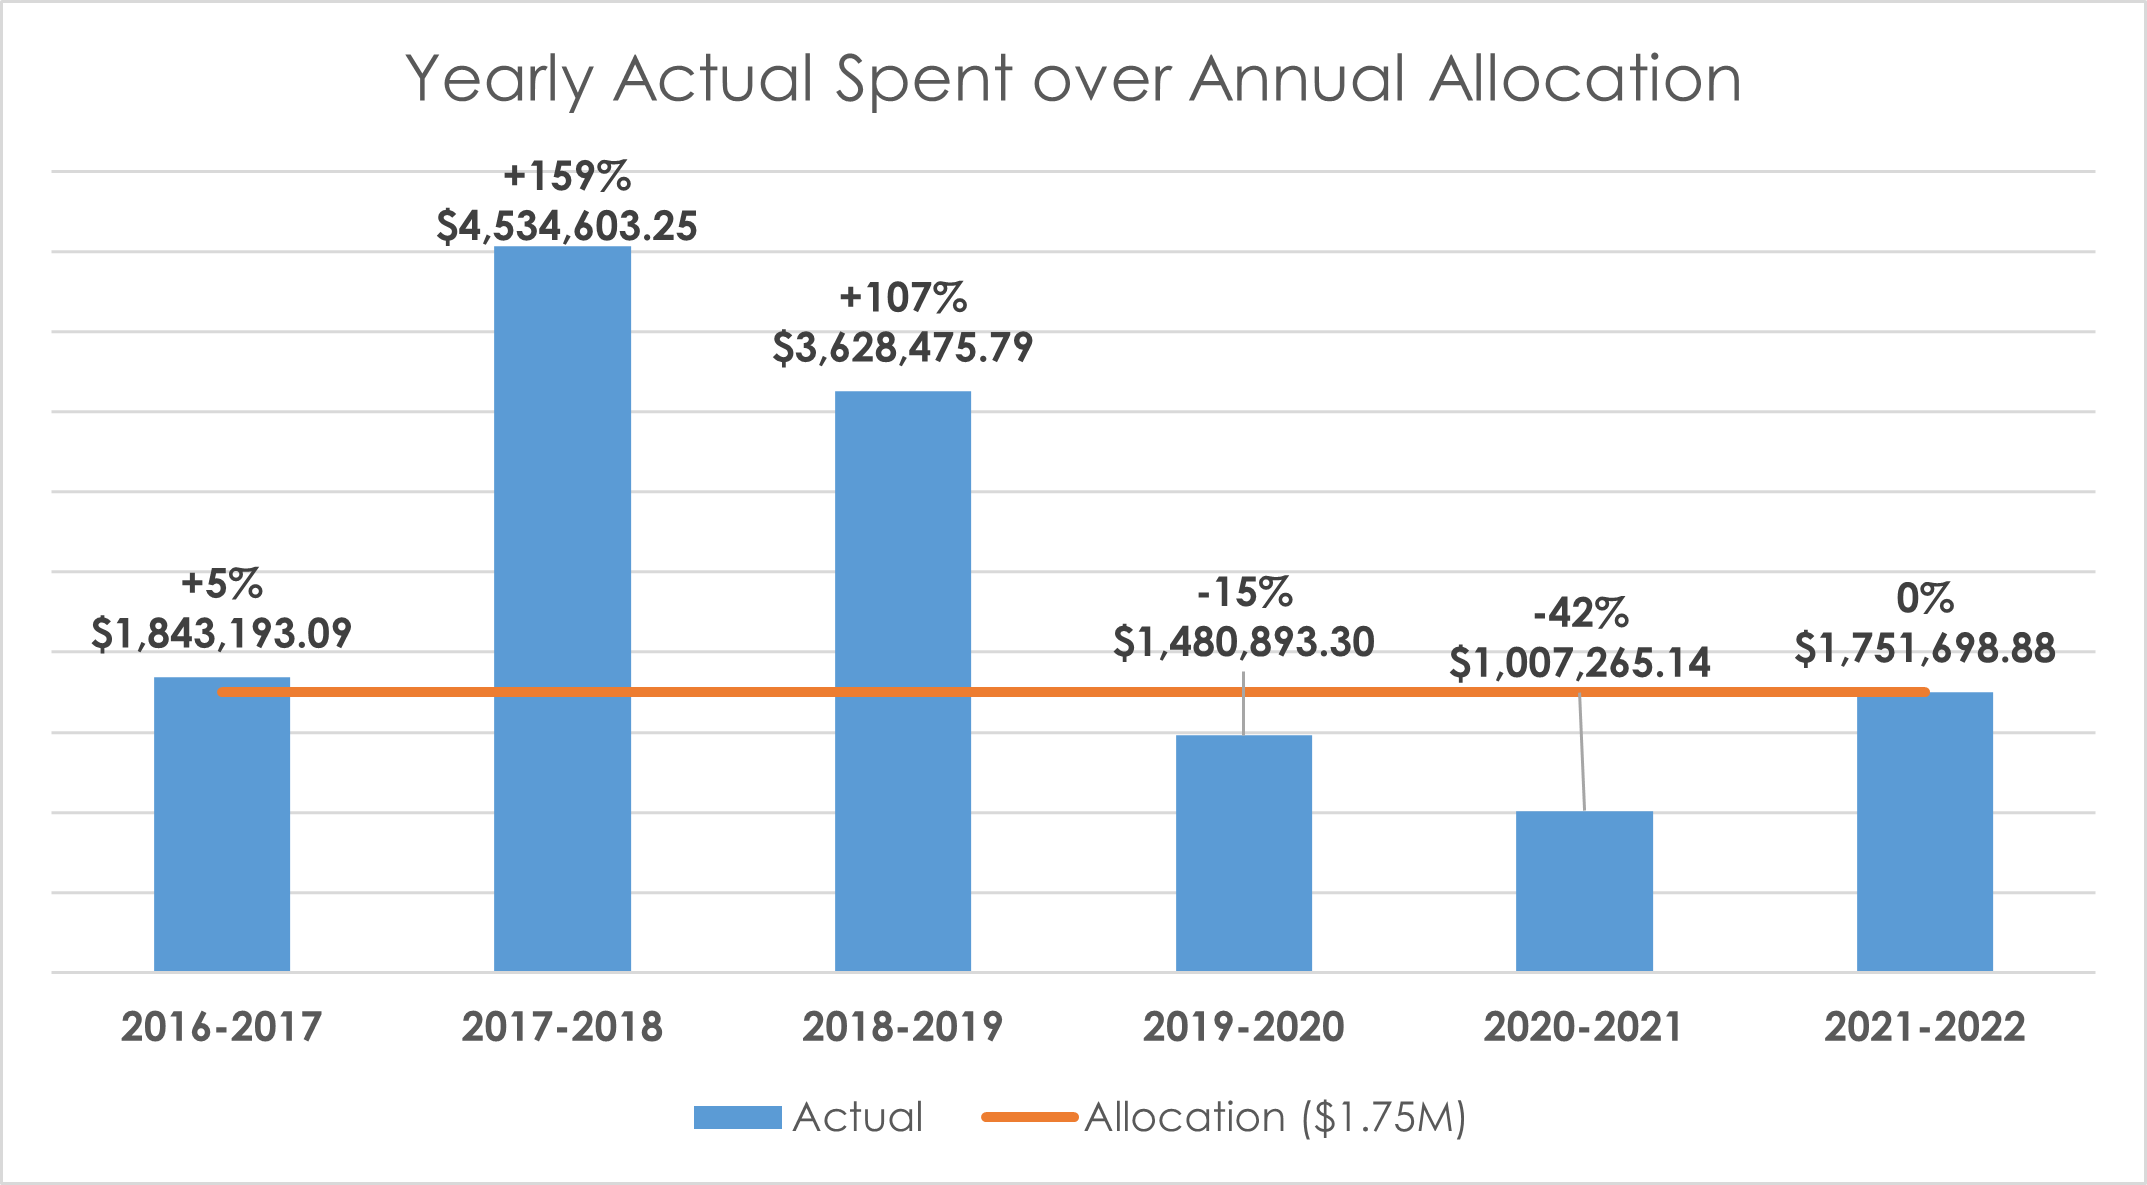 Yearly Actual Spent over Annual Allocation